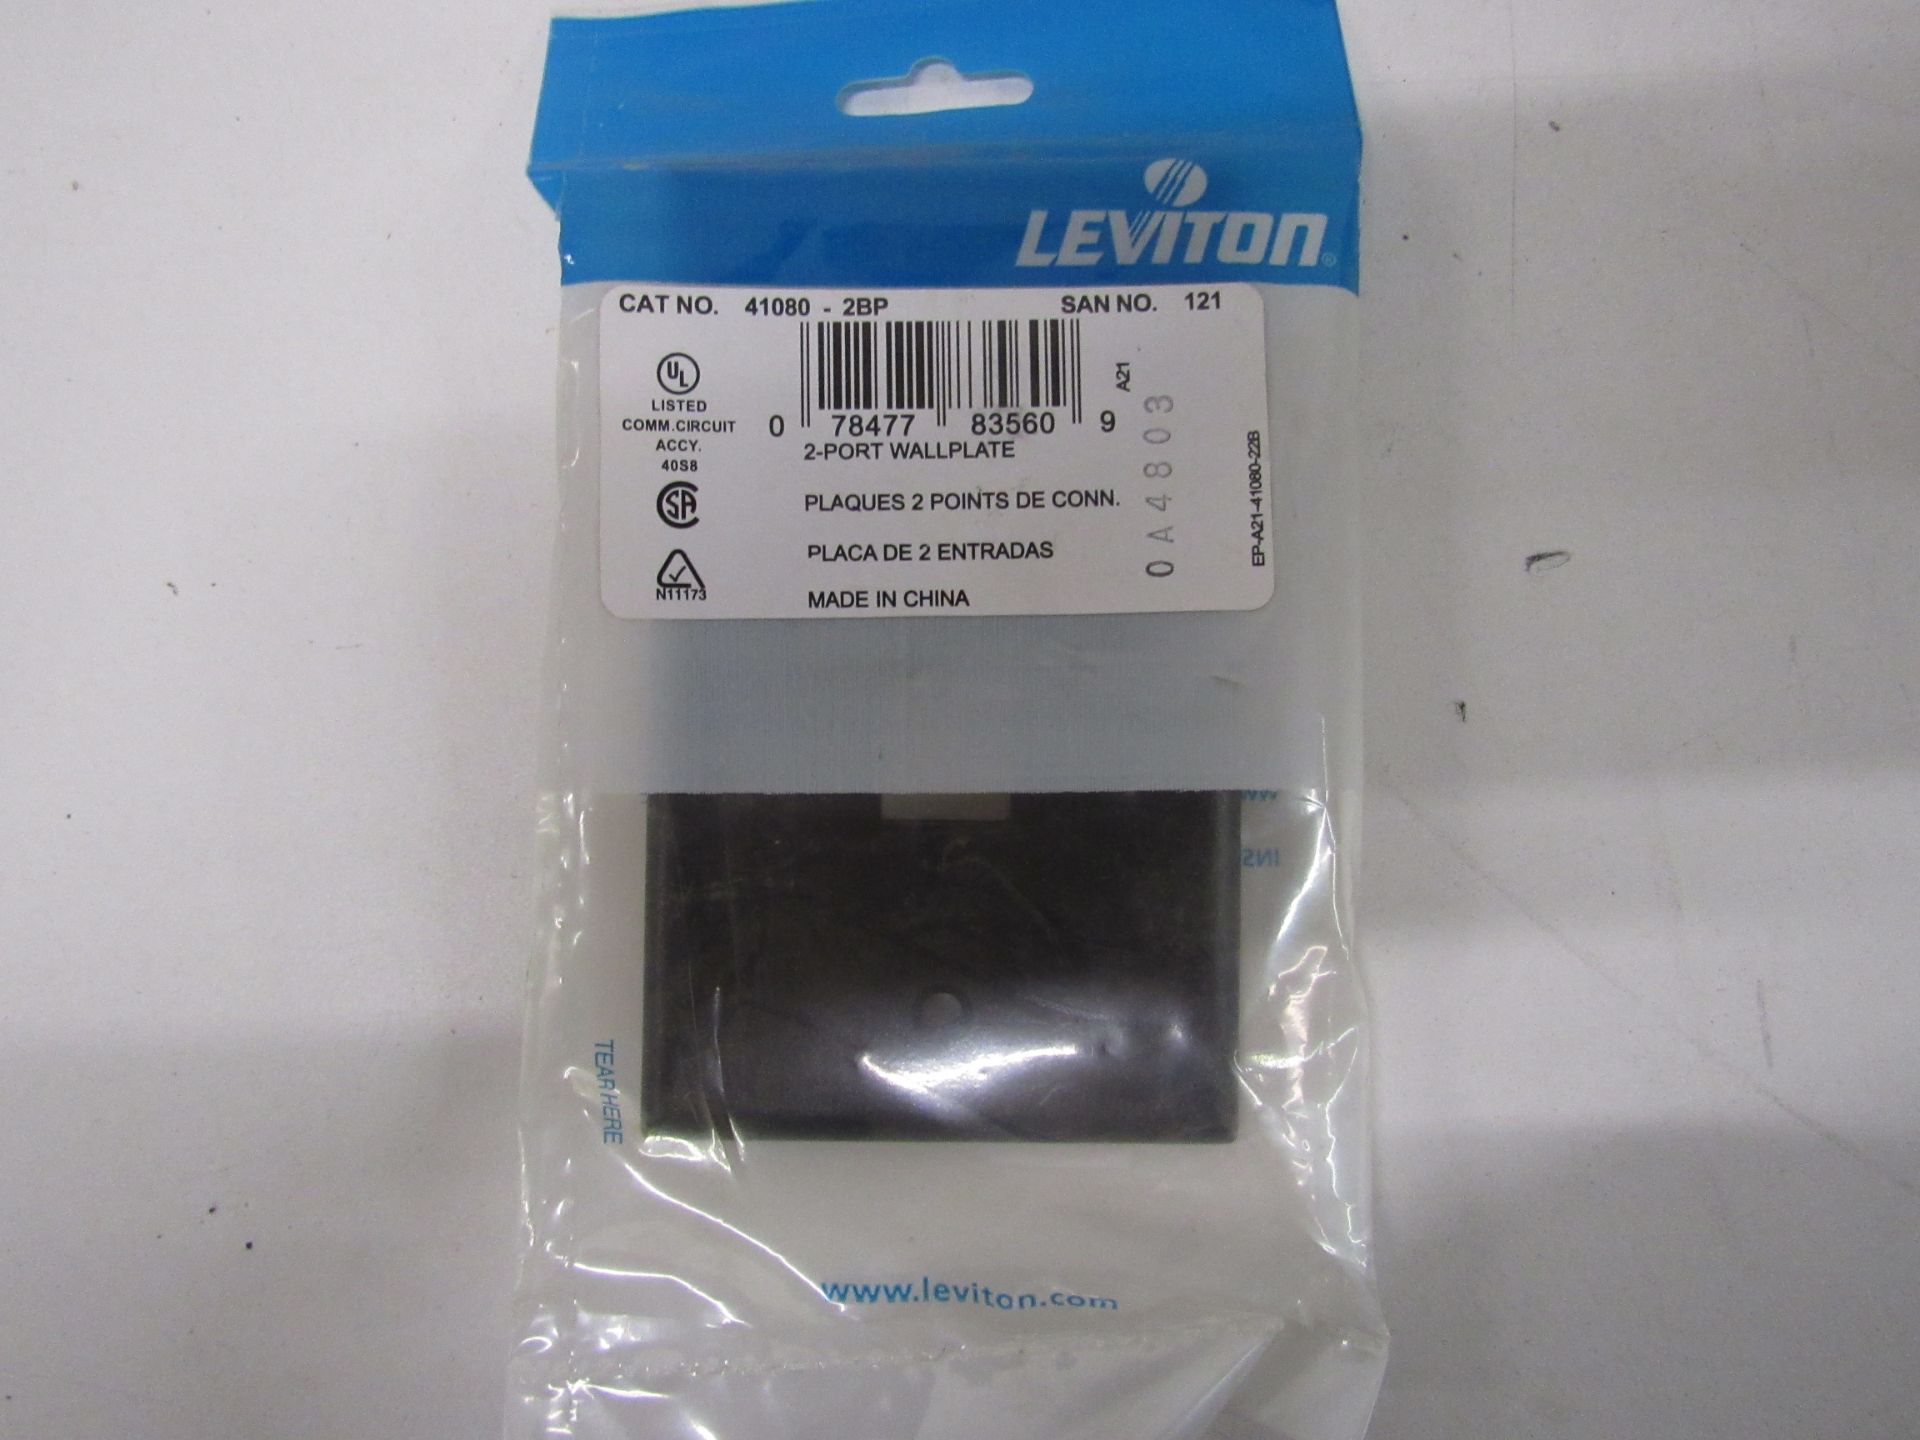 29x Leviton 41080-2BP Wallplates and Accessories Outlet Cover Brown EA 2 Port